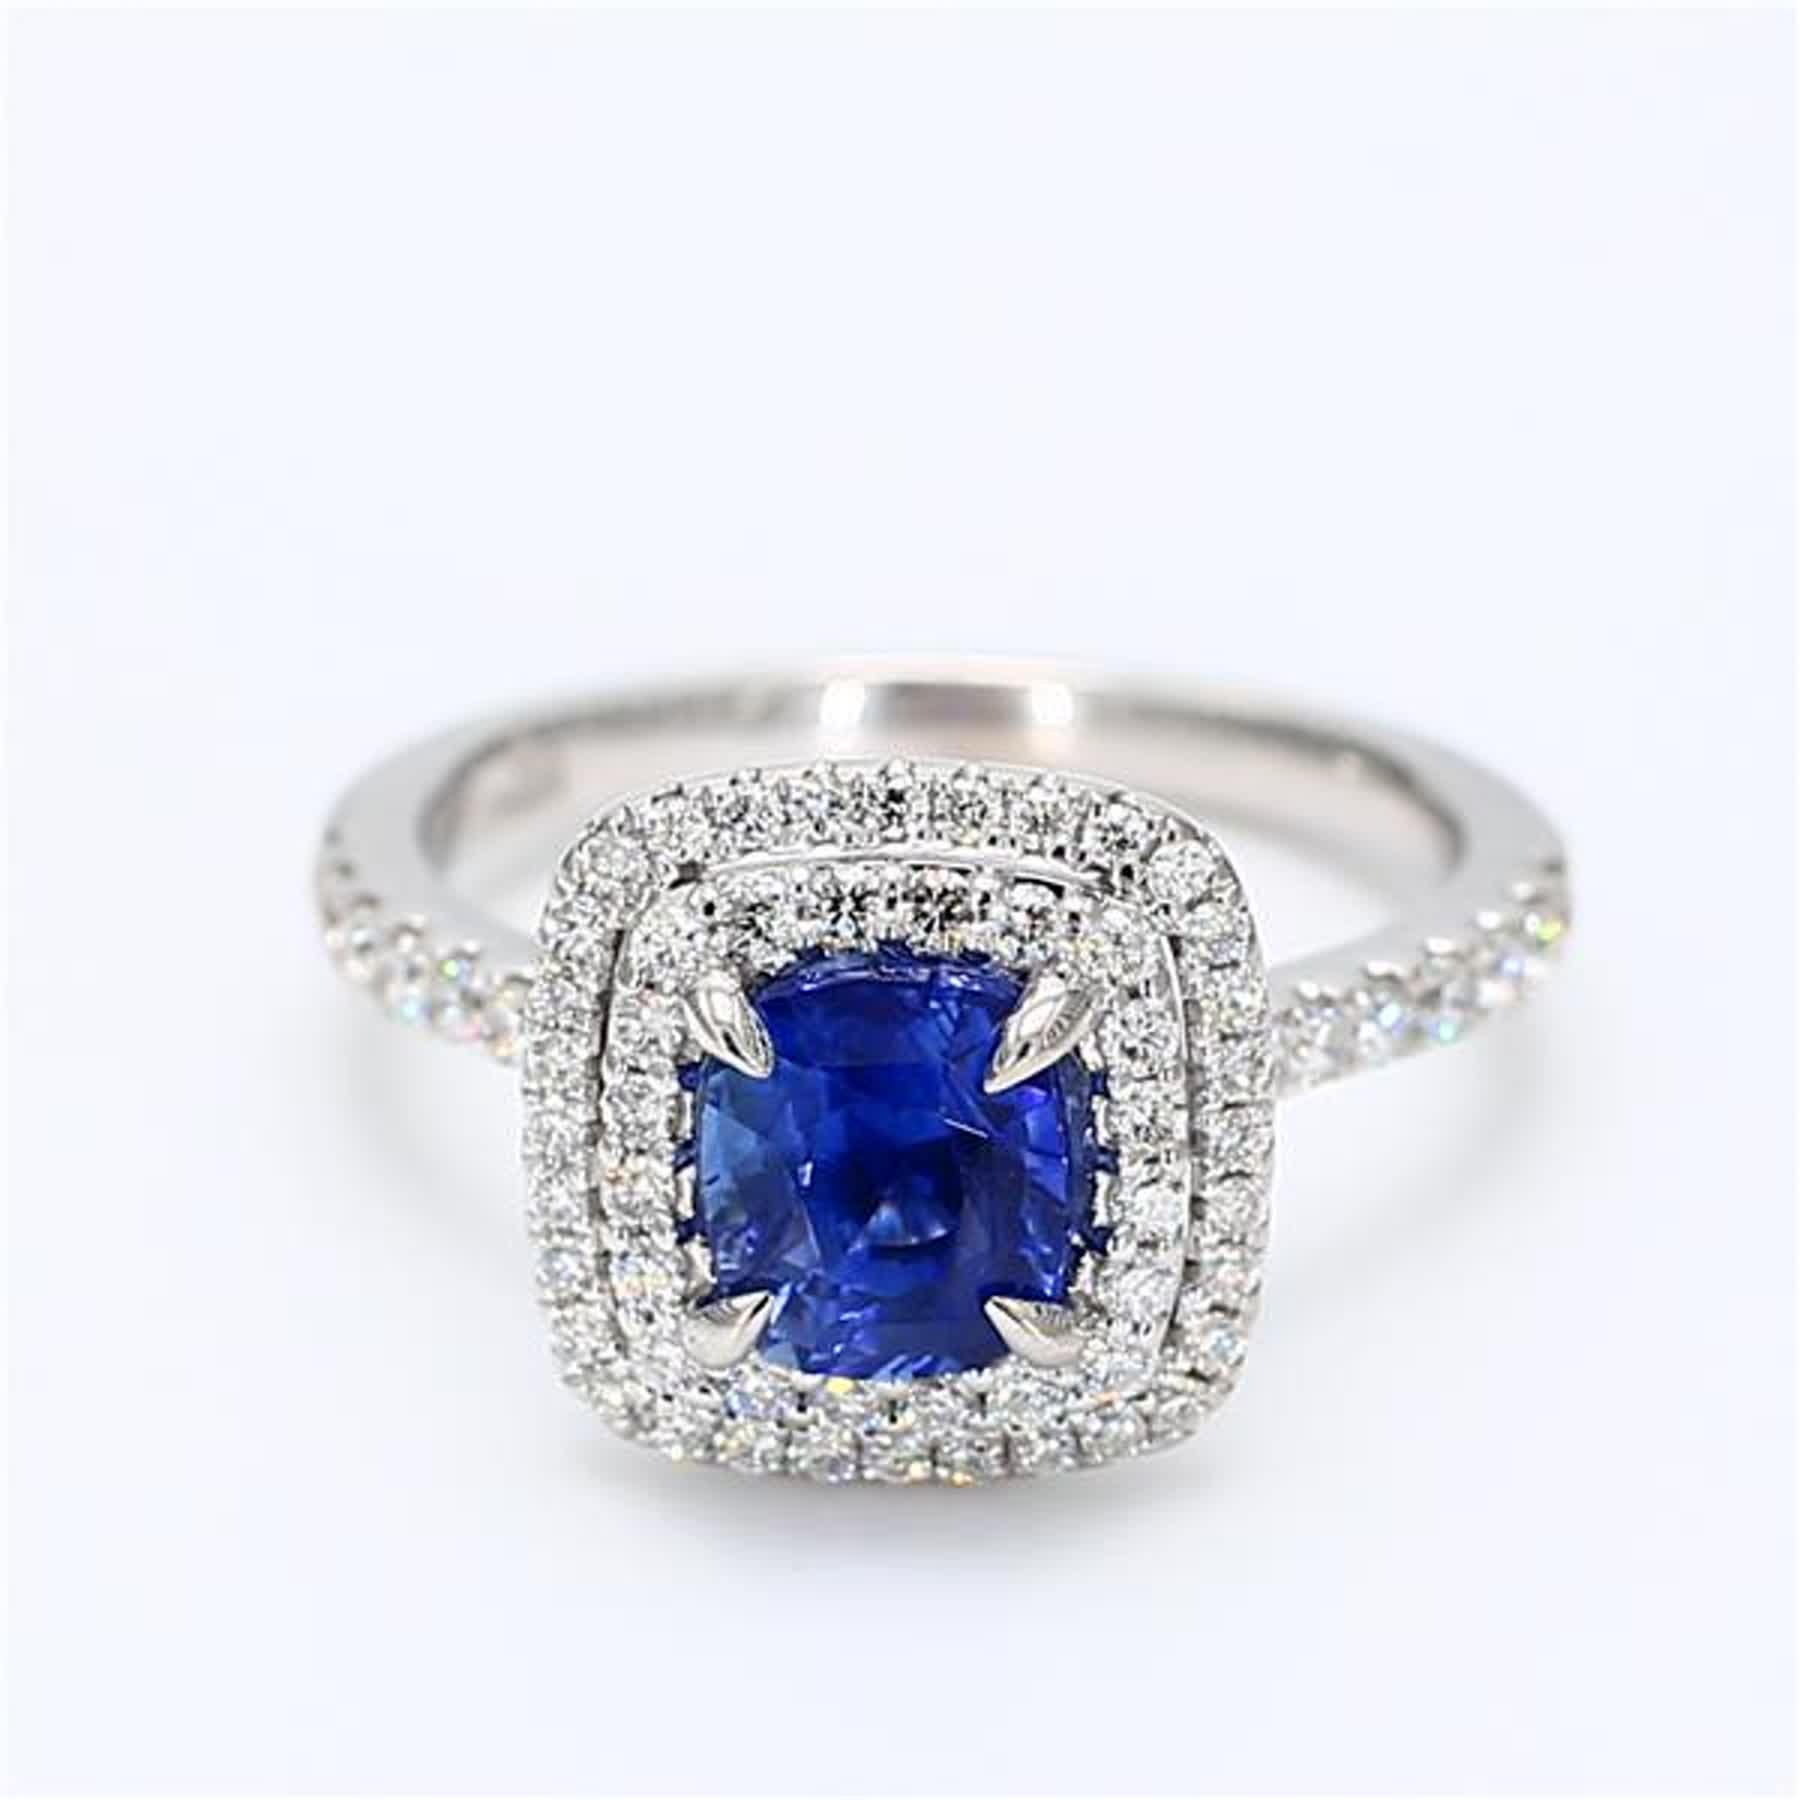 RareGemWorld's classic natural cushion cut sapphire ring. Mounted in a beautiful 18K White Gold setting with a natural cushion cut blue sapphire. The sapphire is surrounded by natural round white diamond melee. This ring is guaranteed to impress and